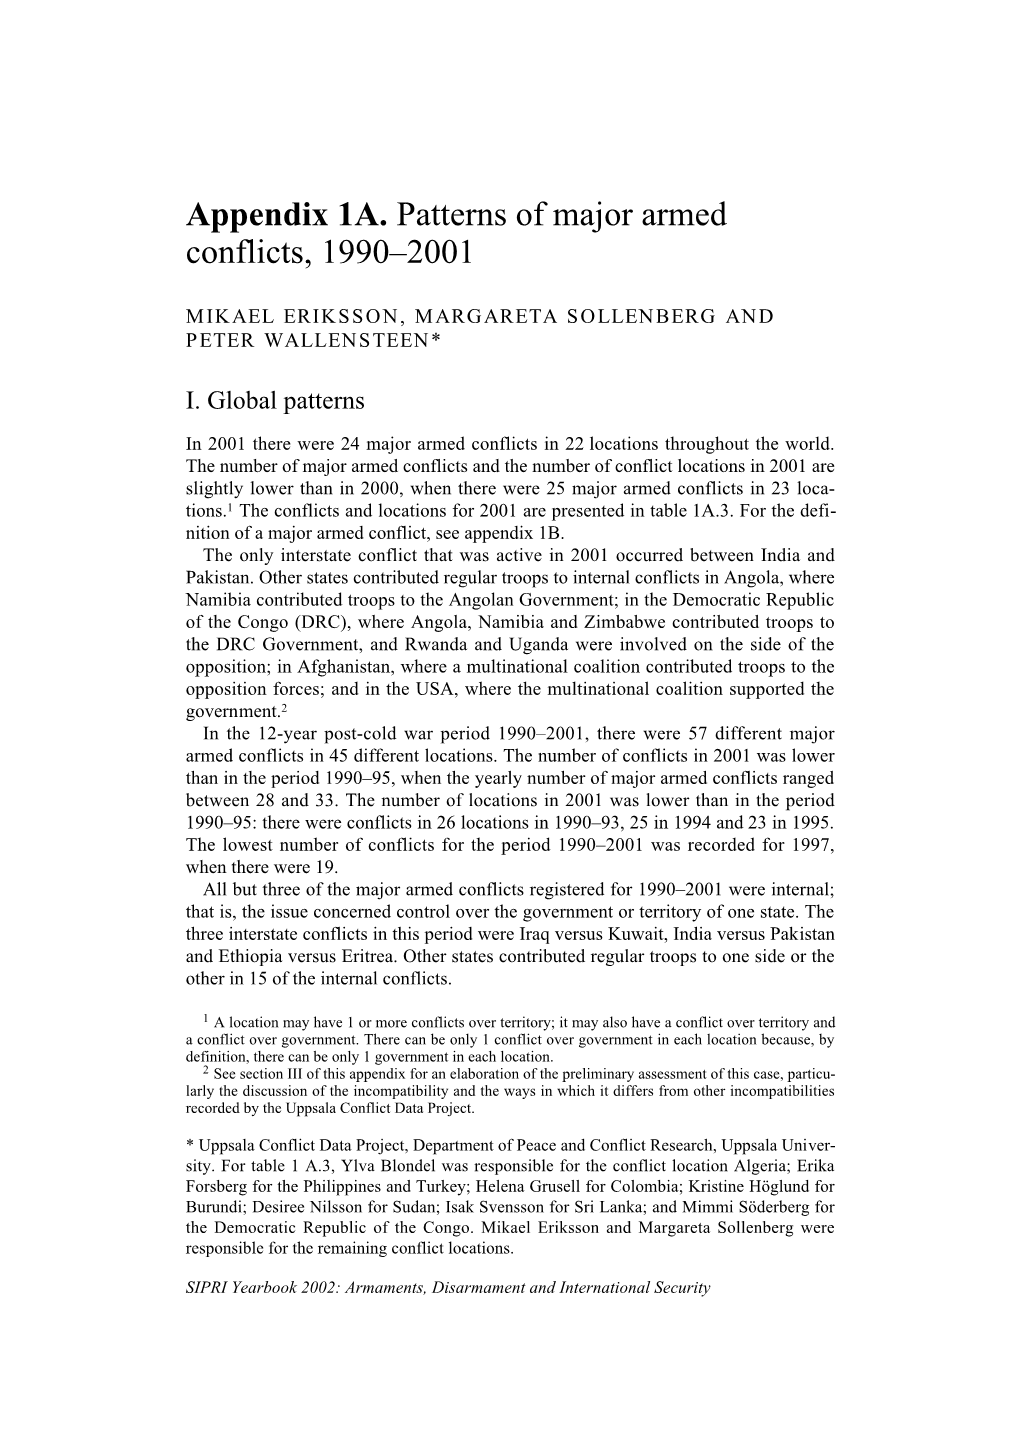 Appendix 1A. Patterns of Major Armed Conflicts, 1990–2001